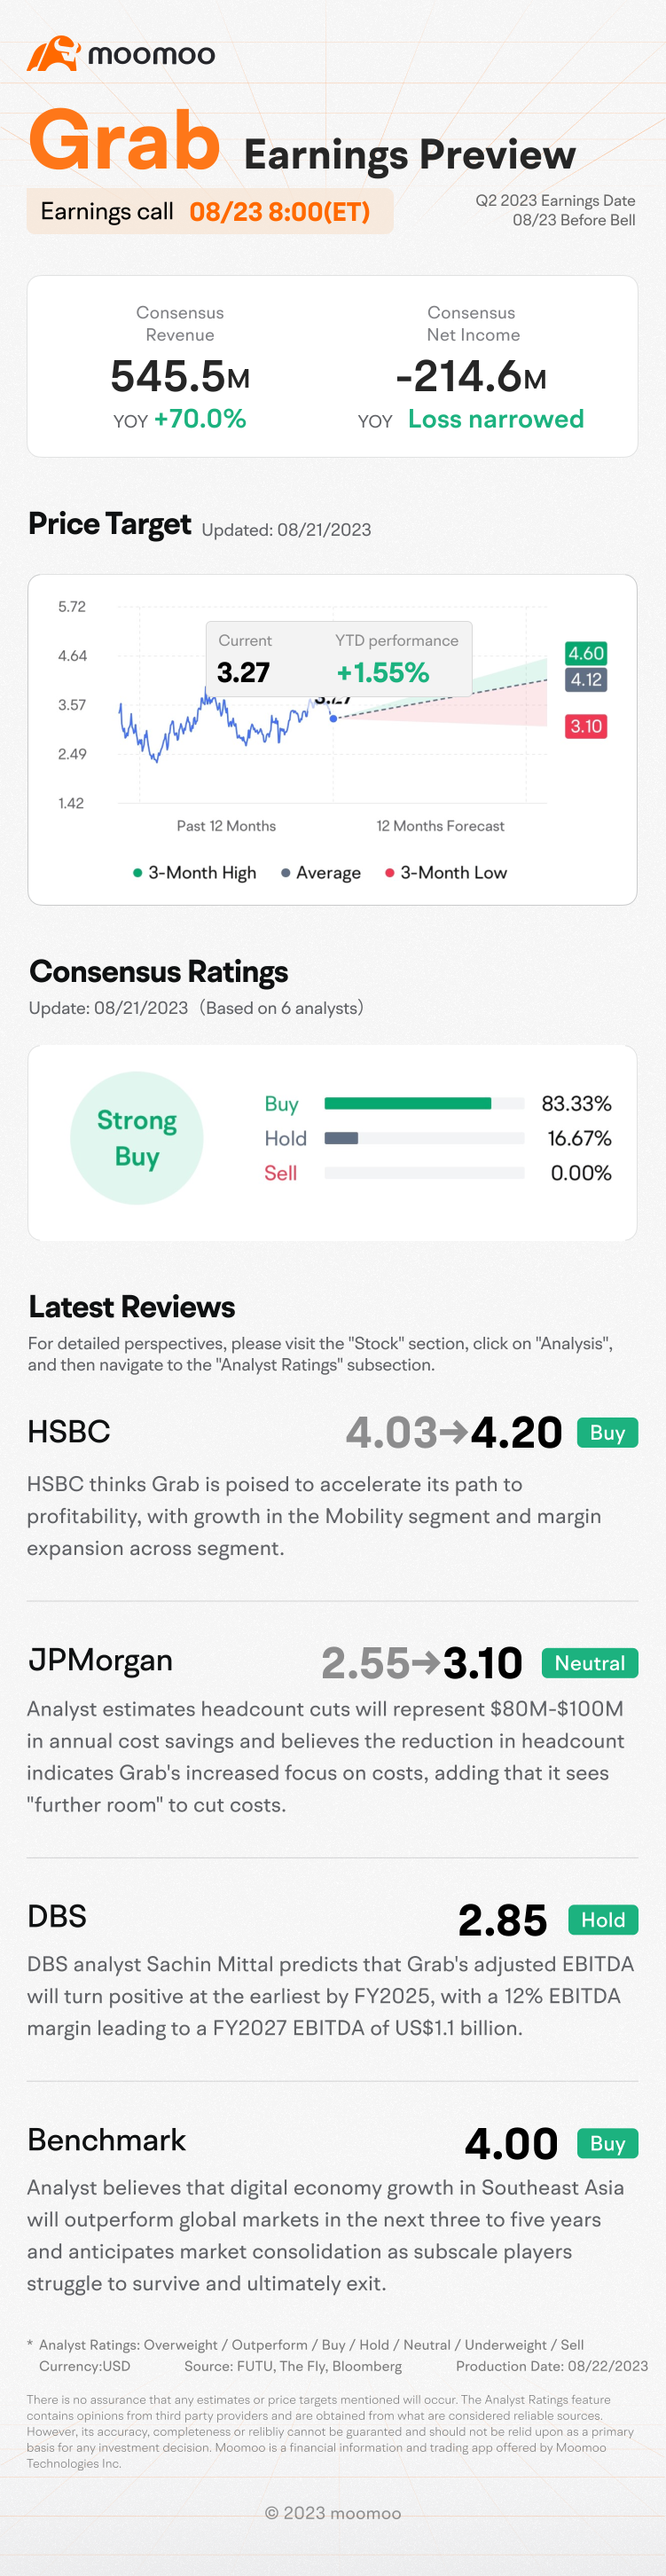 Grab Q2 2023 Earnings Preview: Grab rewards by guessing the closing price!